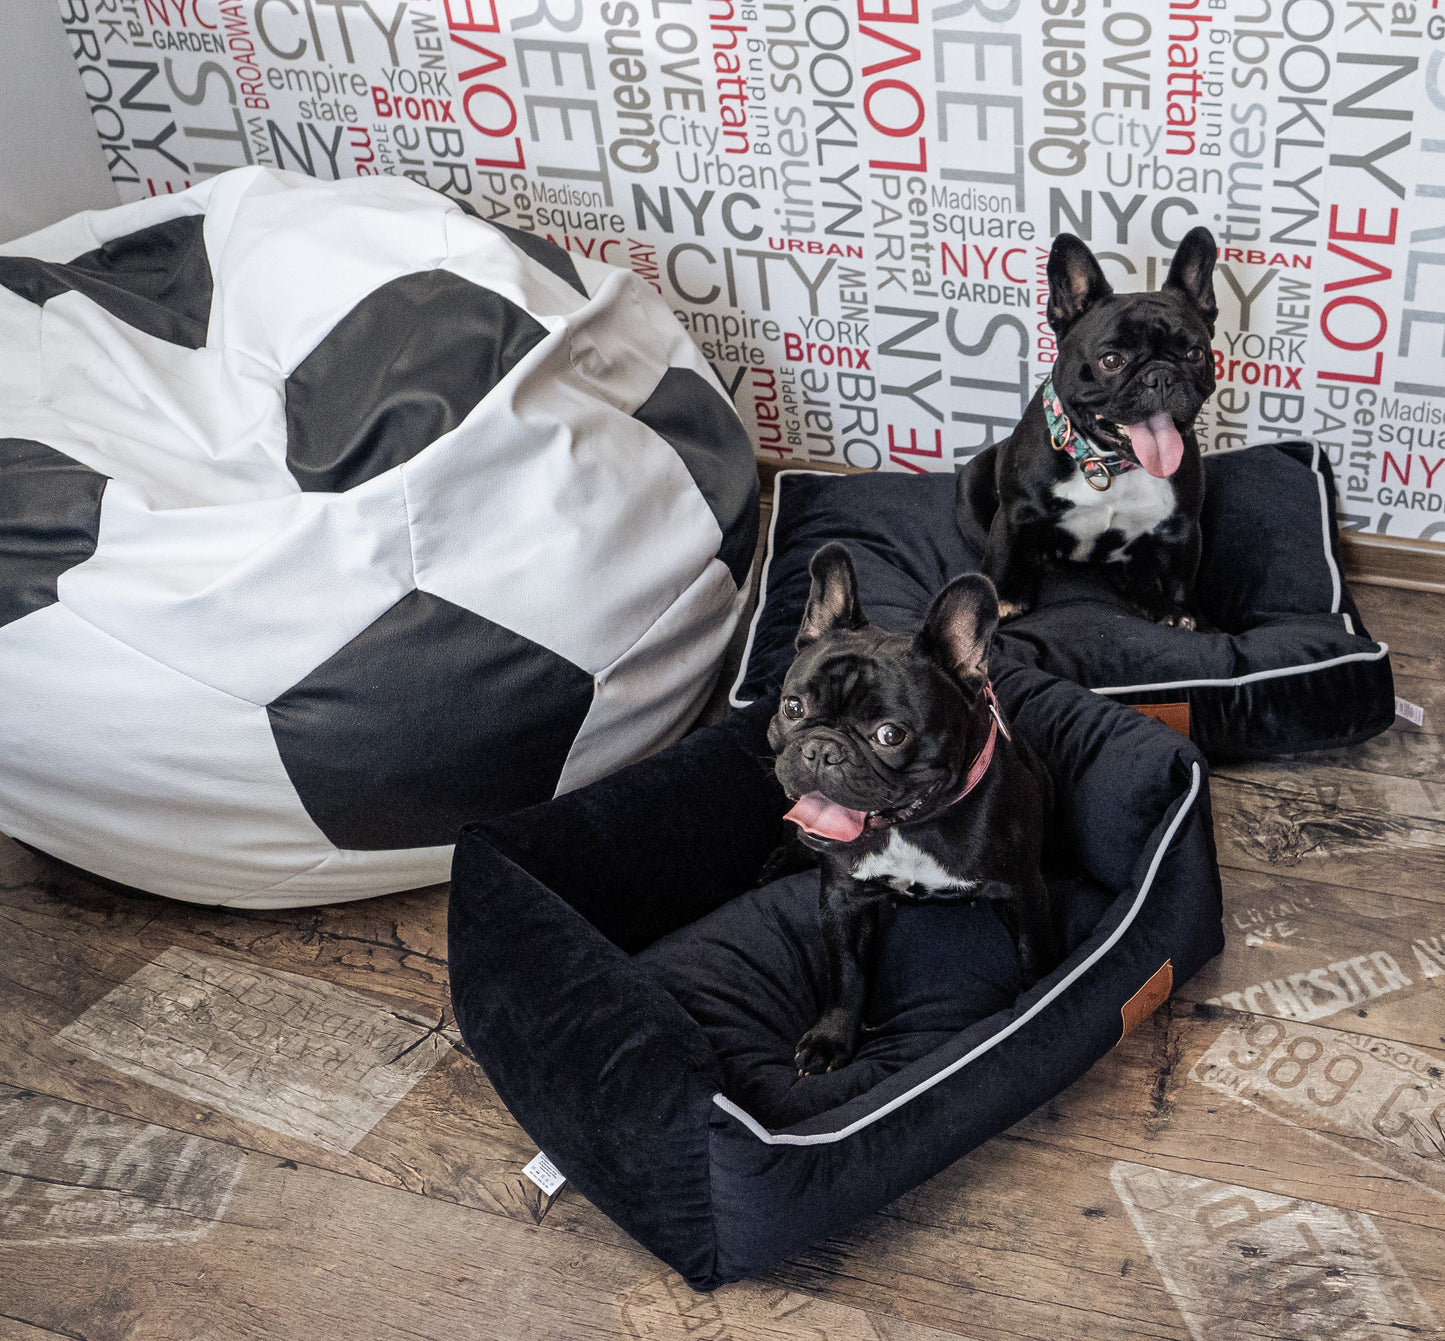 Sofa/bed/kennel with removable cover for small, medium, large and giant size dogs.